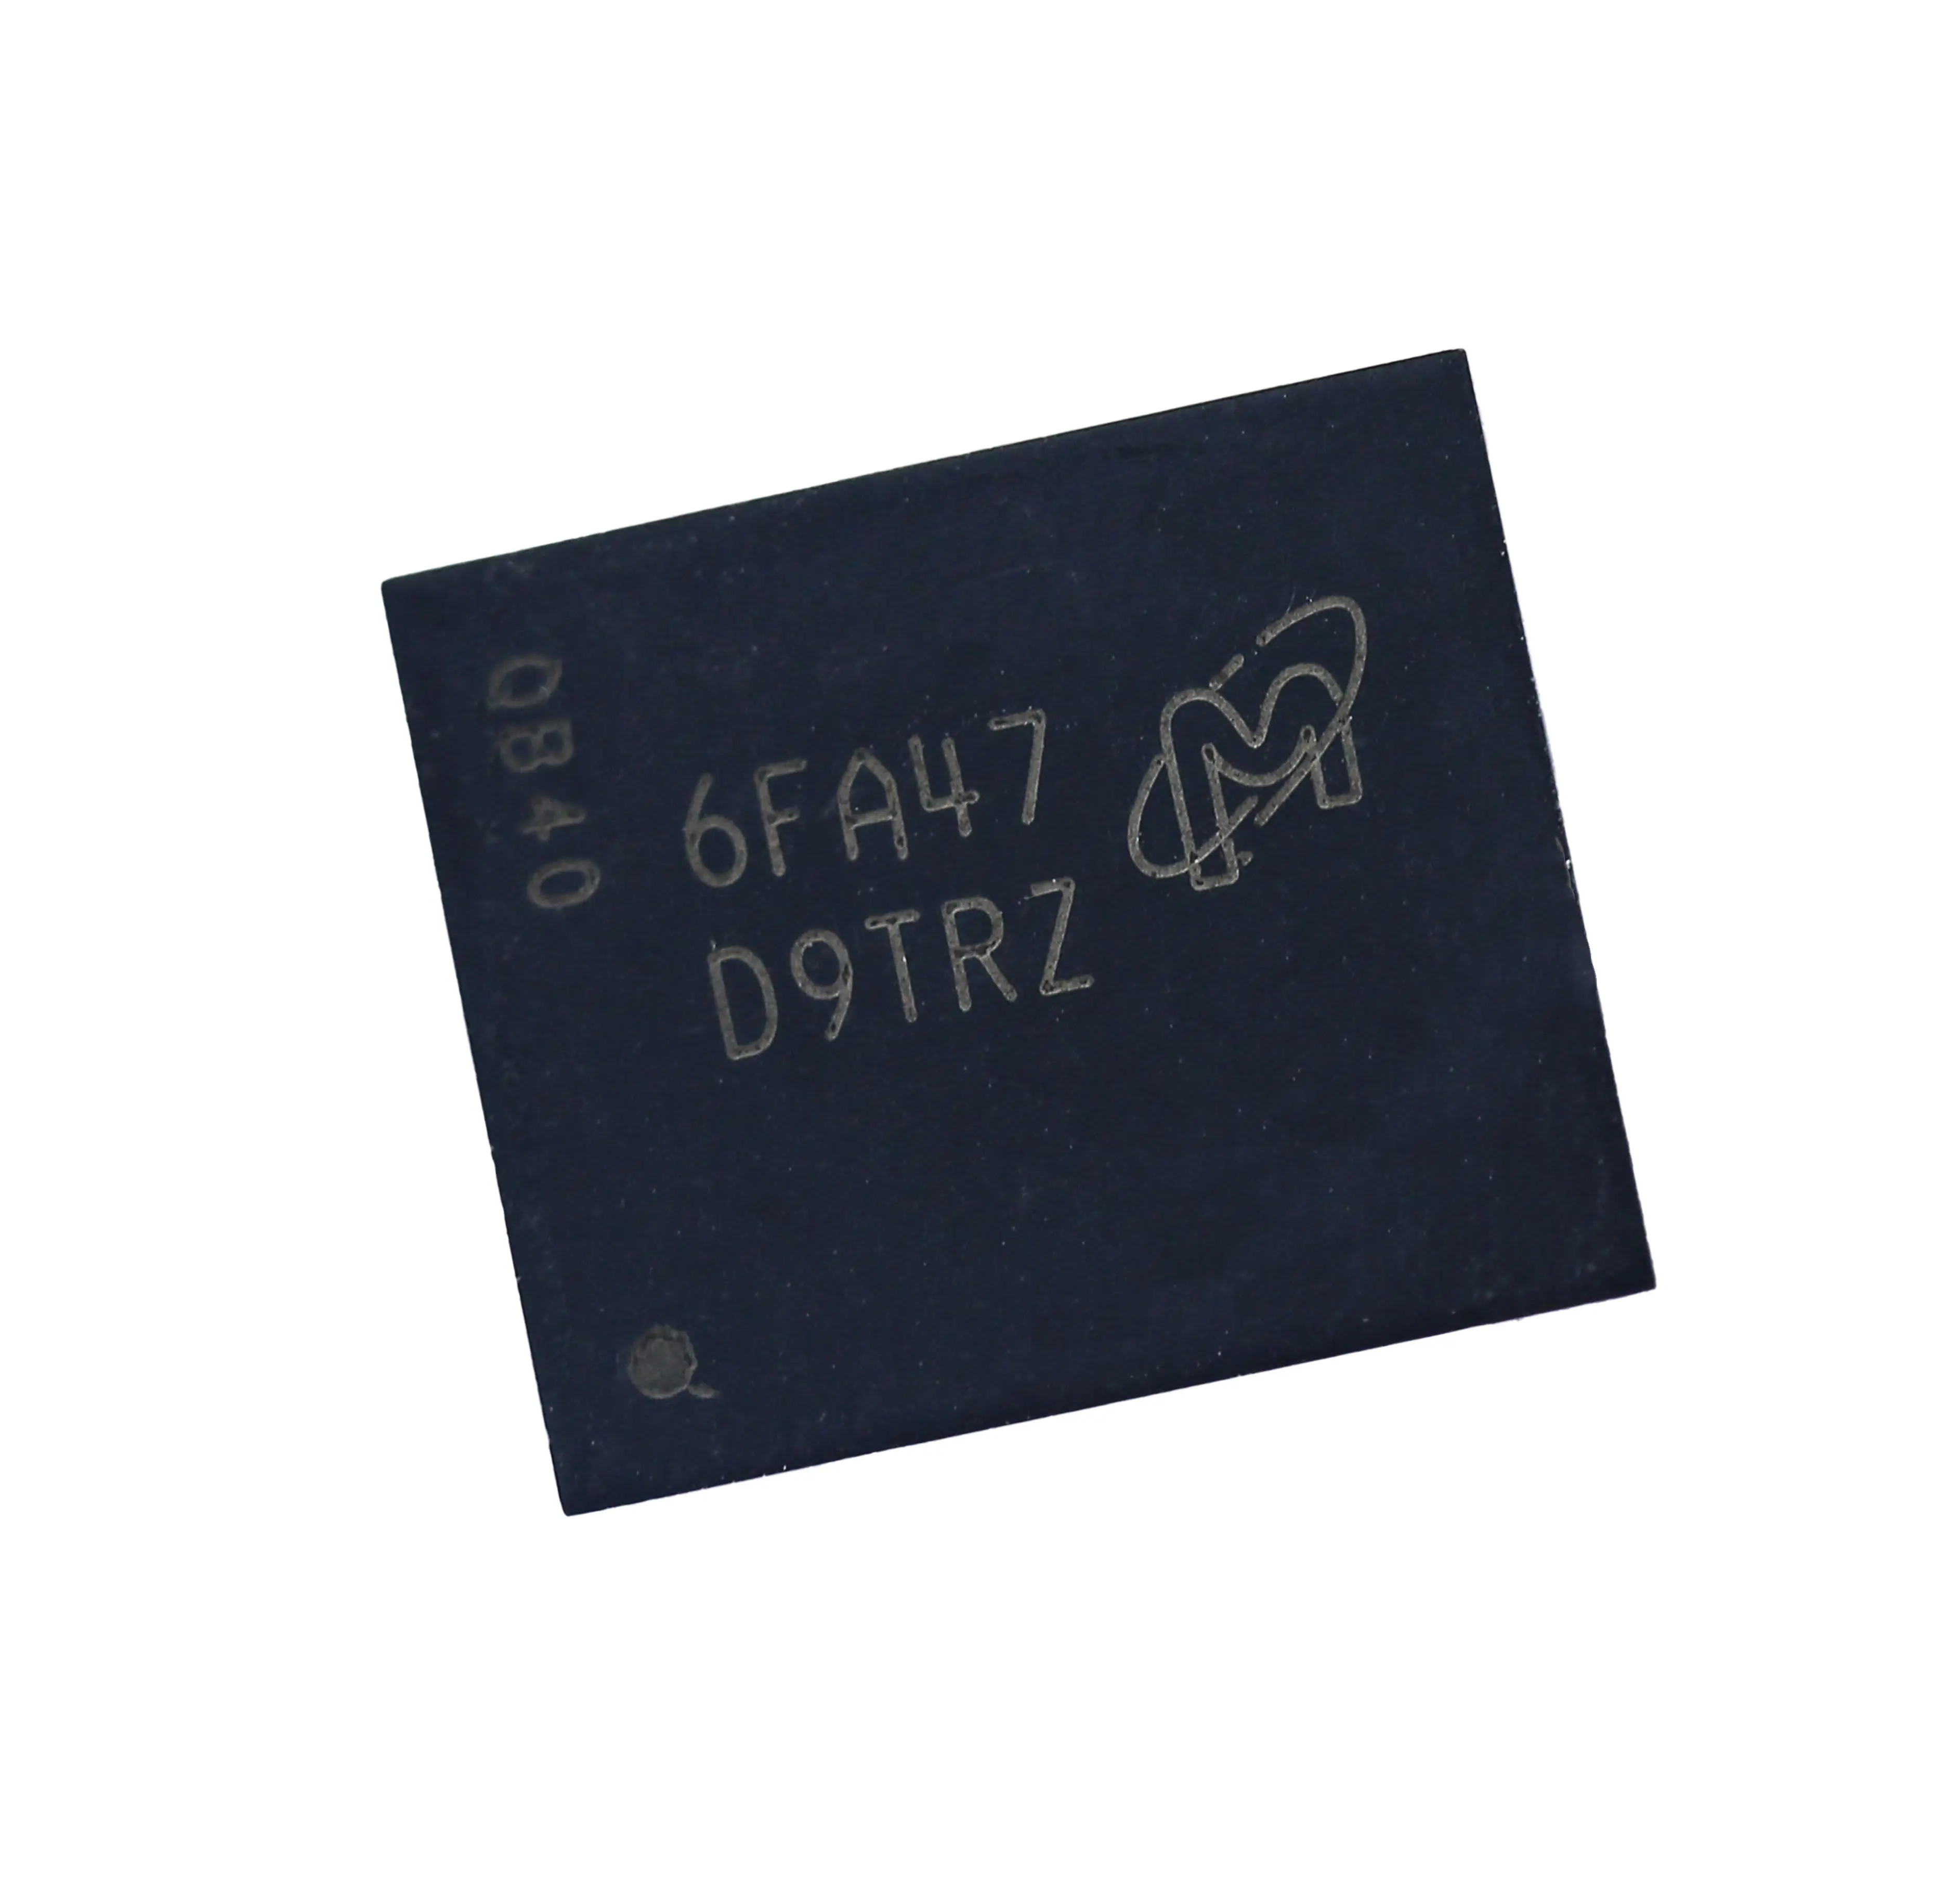 Support-bom-quotation Electronic Components bga chipset Electronics Stock D9TRZ